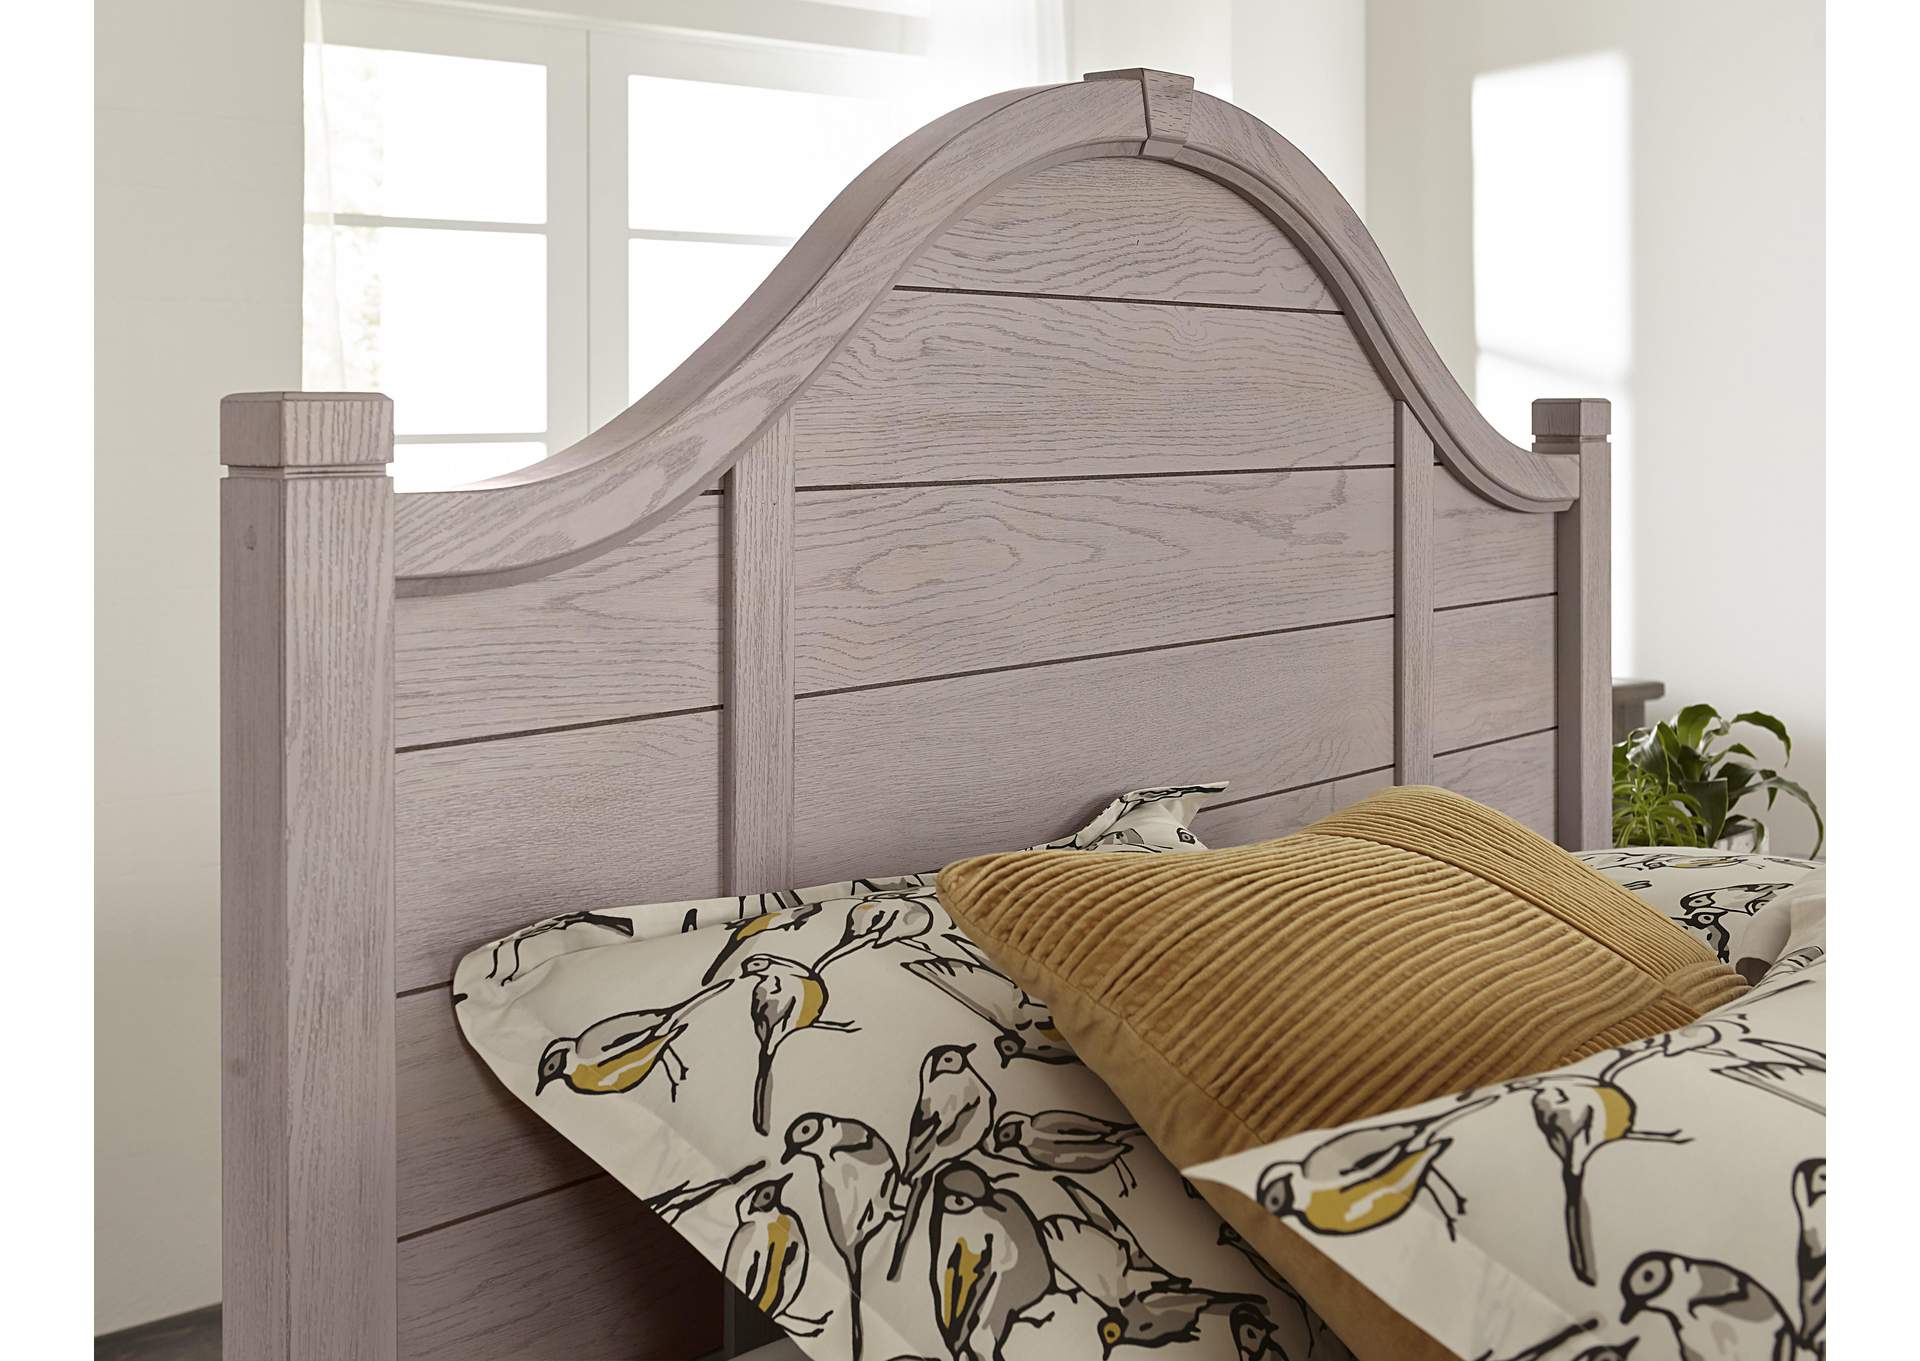 Bungalow-Dover Grey Two Tone Queen Arched Bed,Vaughan-Bassett